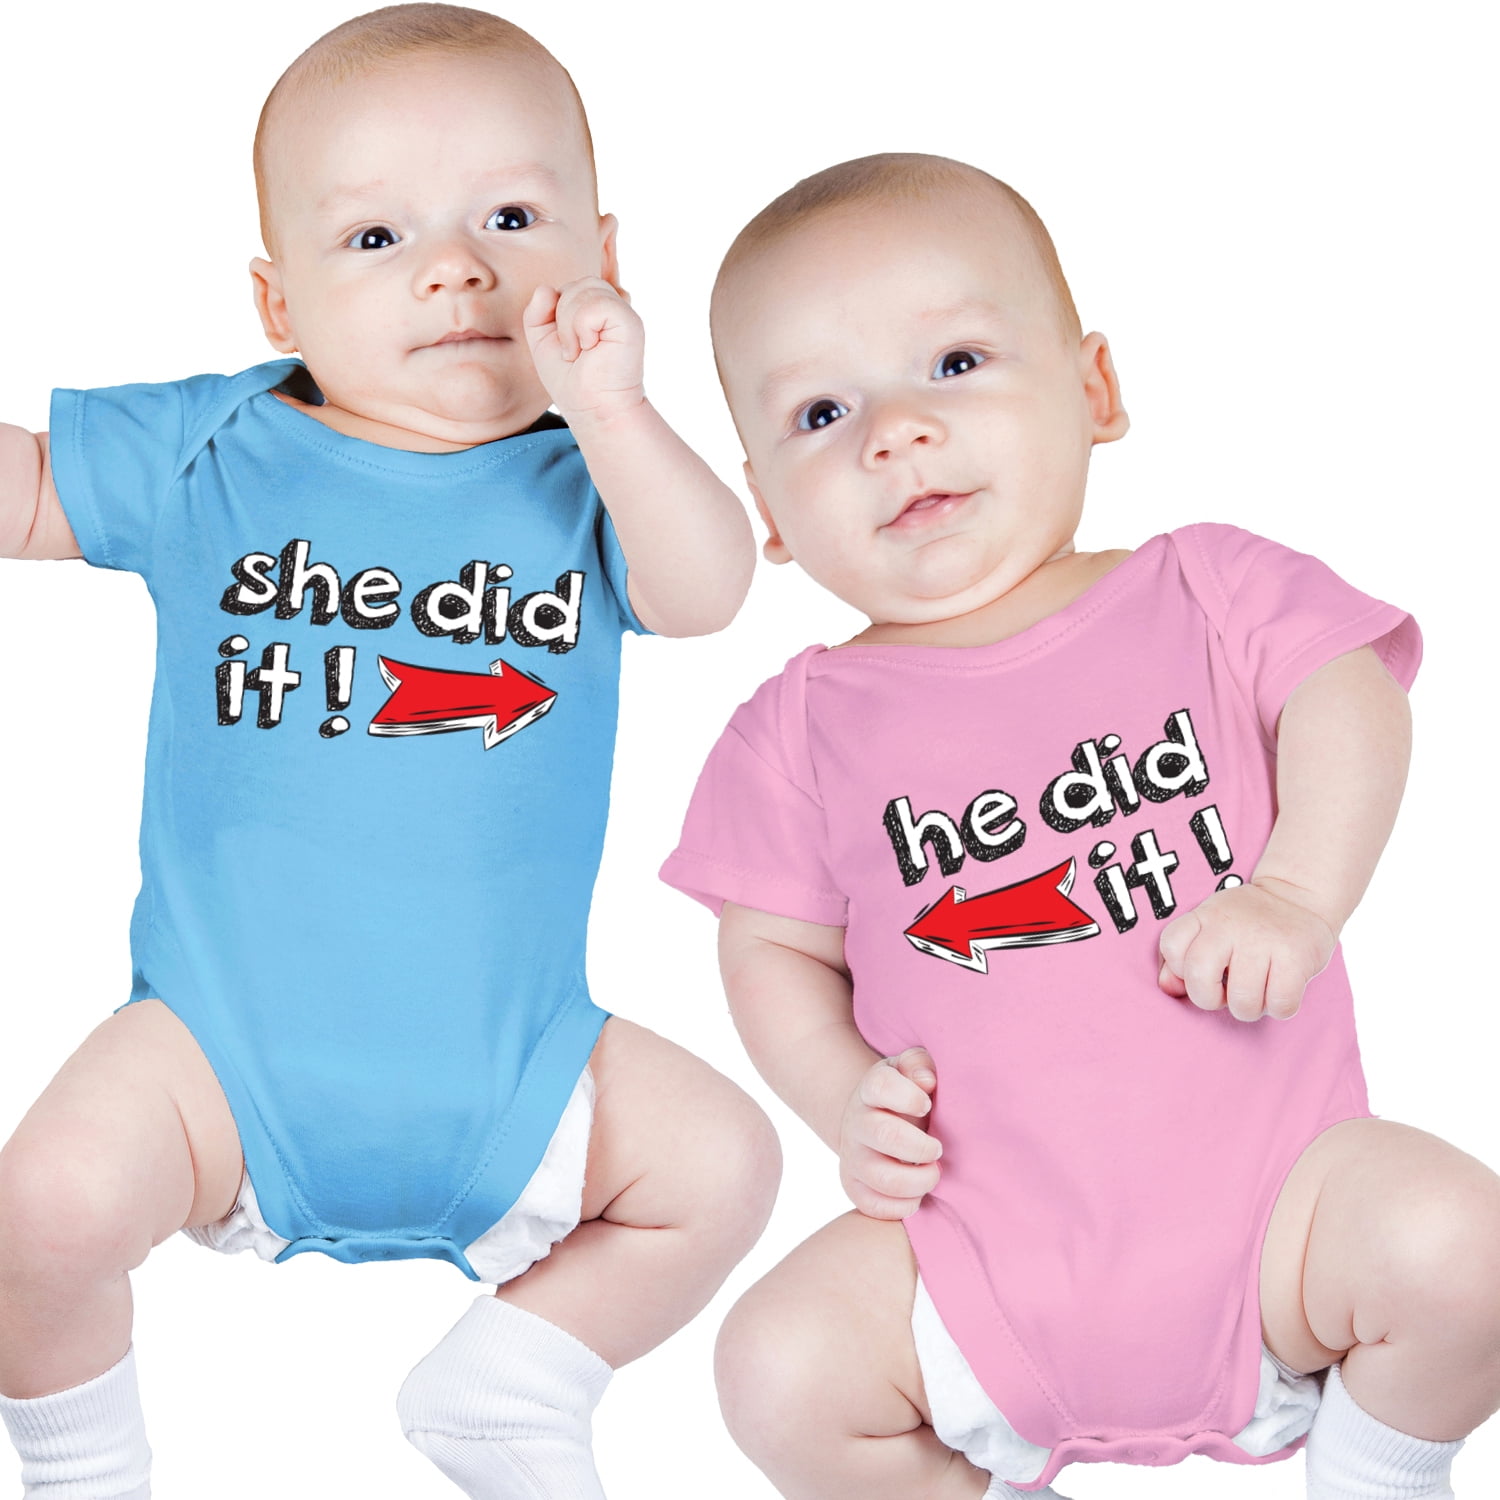 Girl Boy Twins Matching Outfits - Preemie Twin Clothes